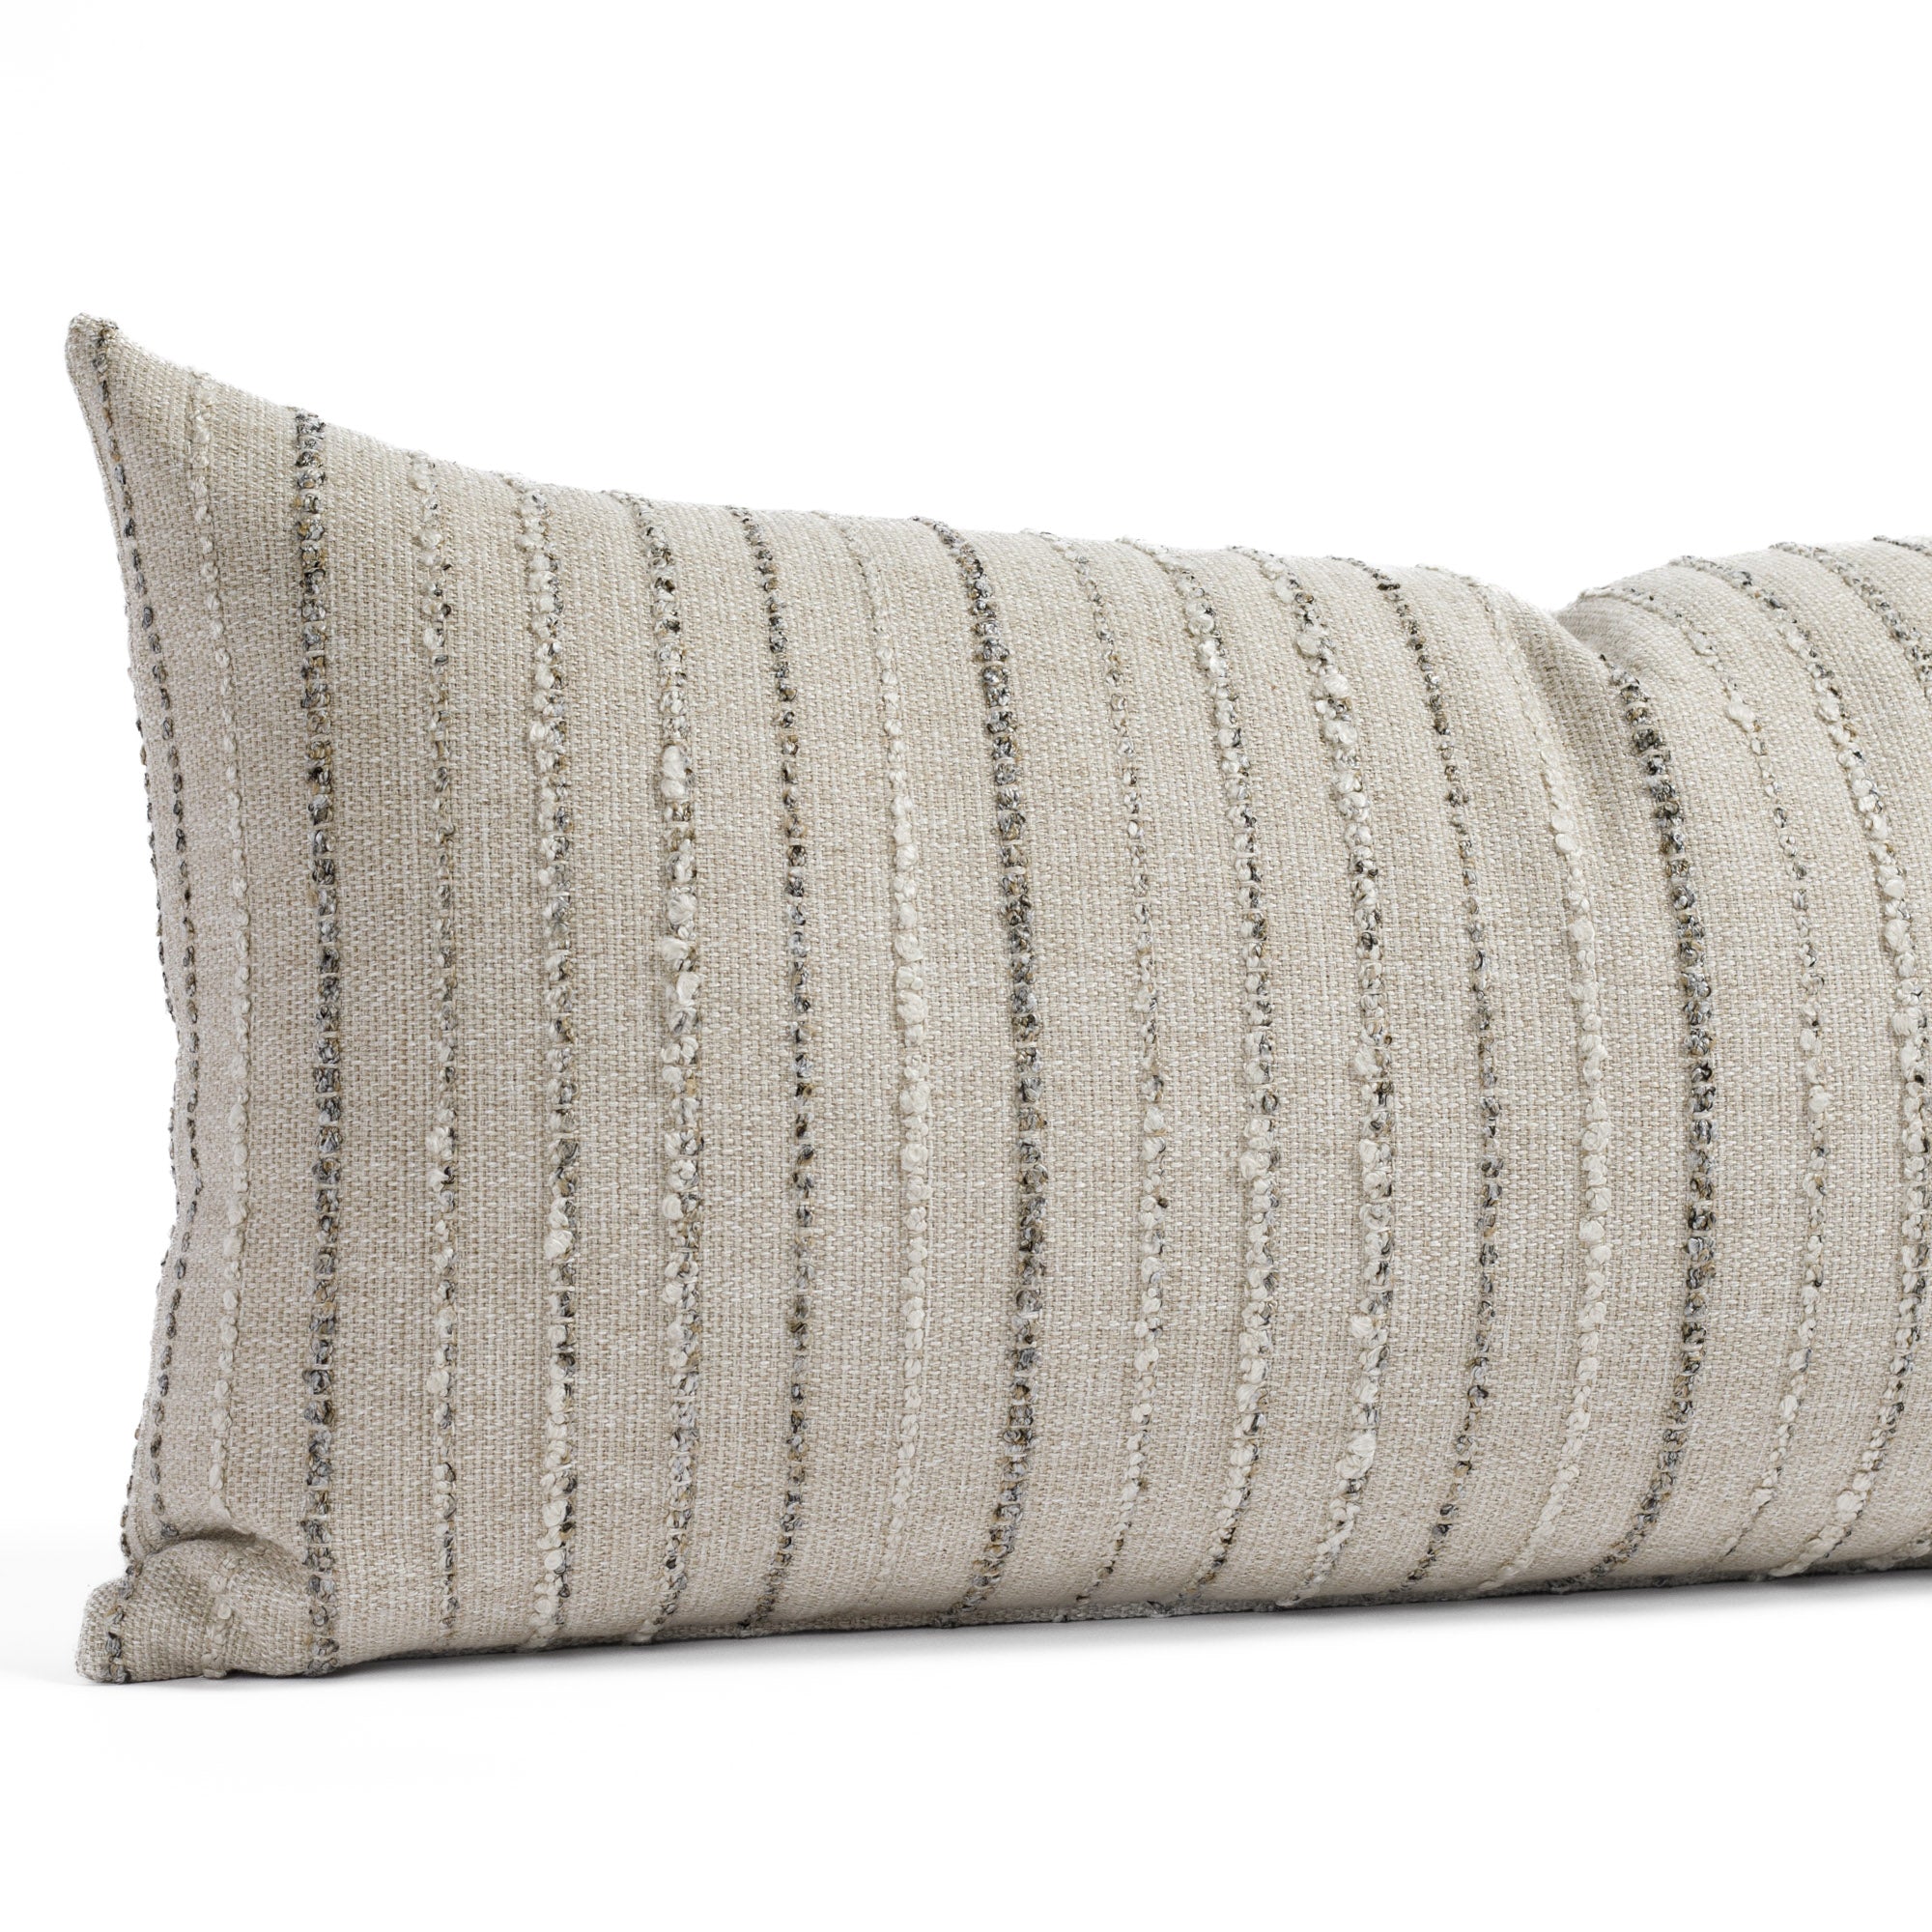 a neutral earth toned striped extra long lumbar pillow : close up view